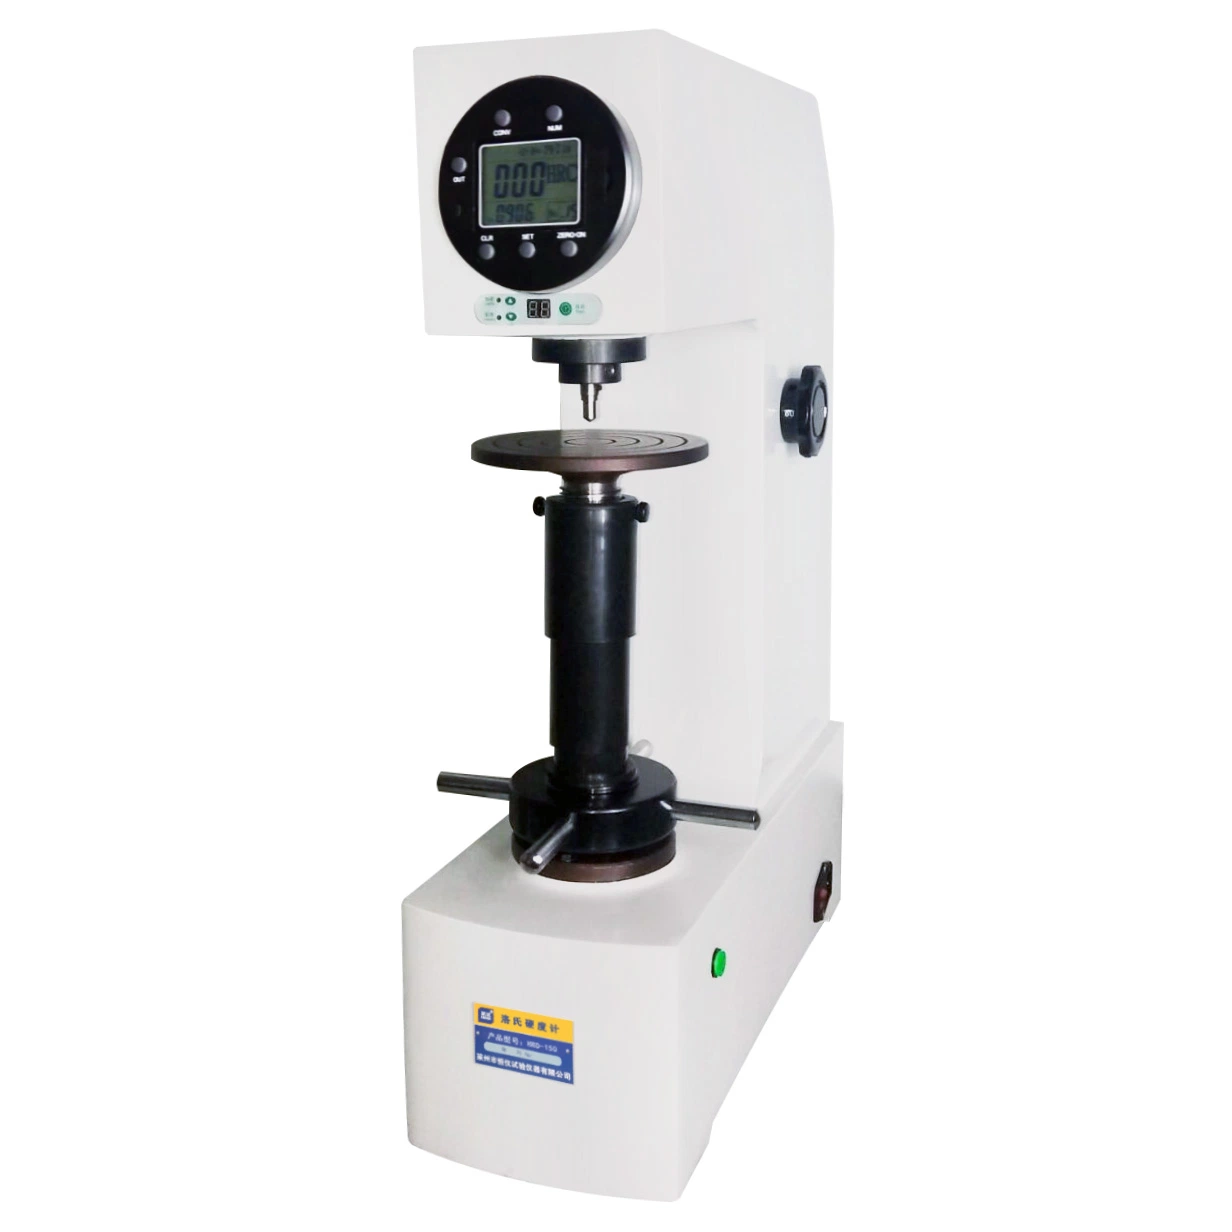 Hrd-150s Electric Motor Digital Display LCD Rockwell Hardness Tester